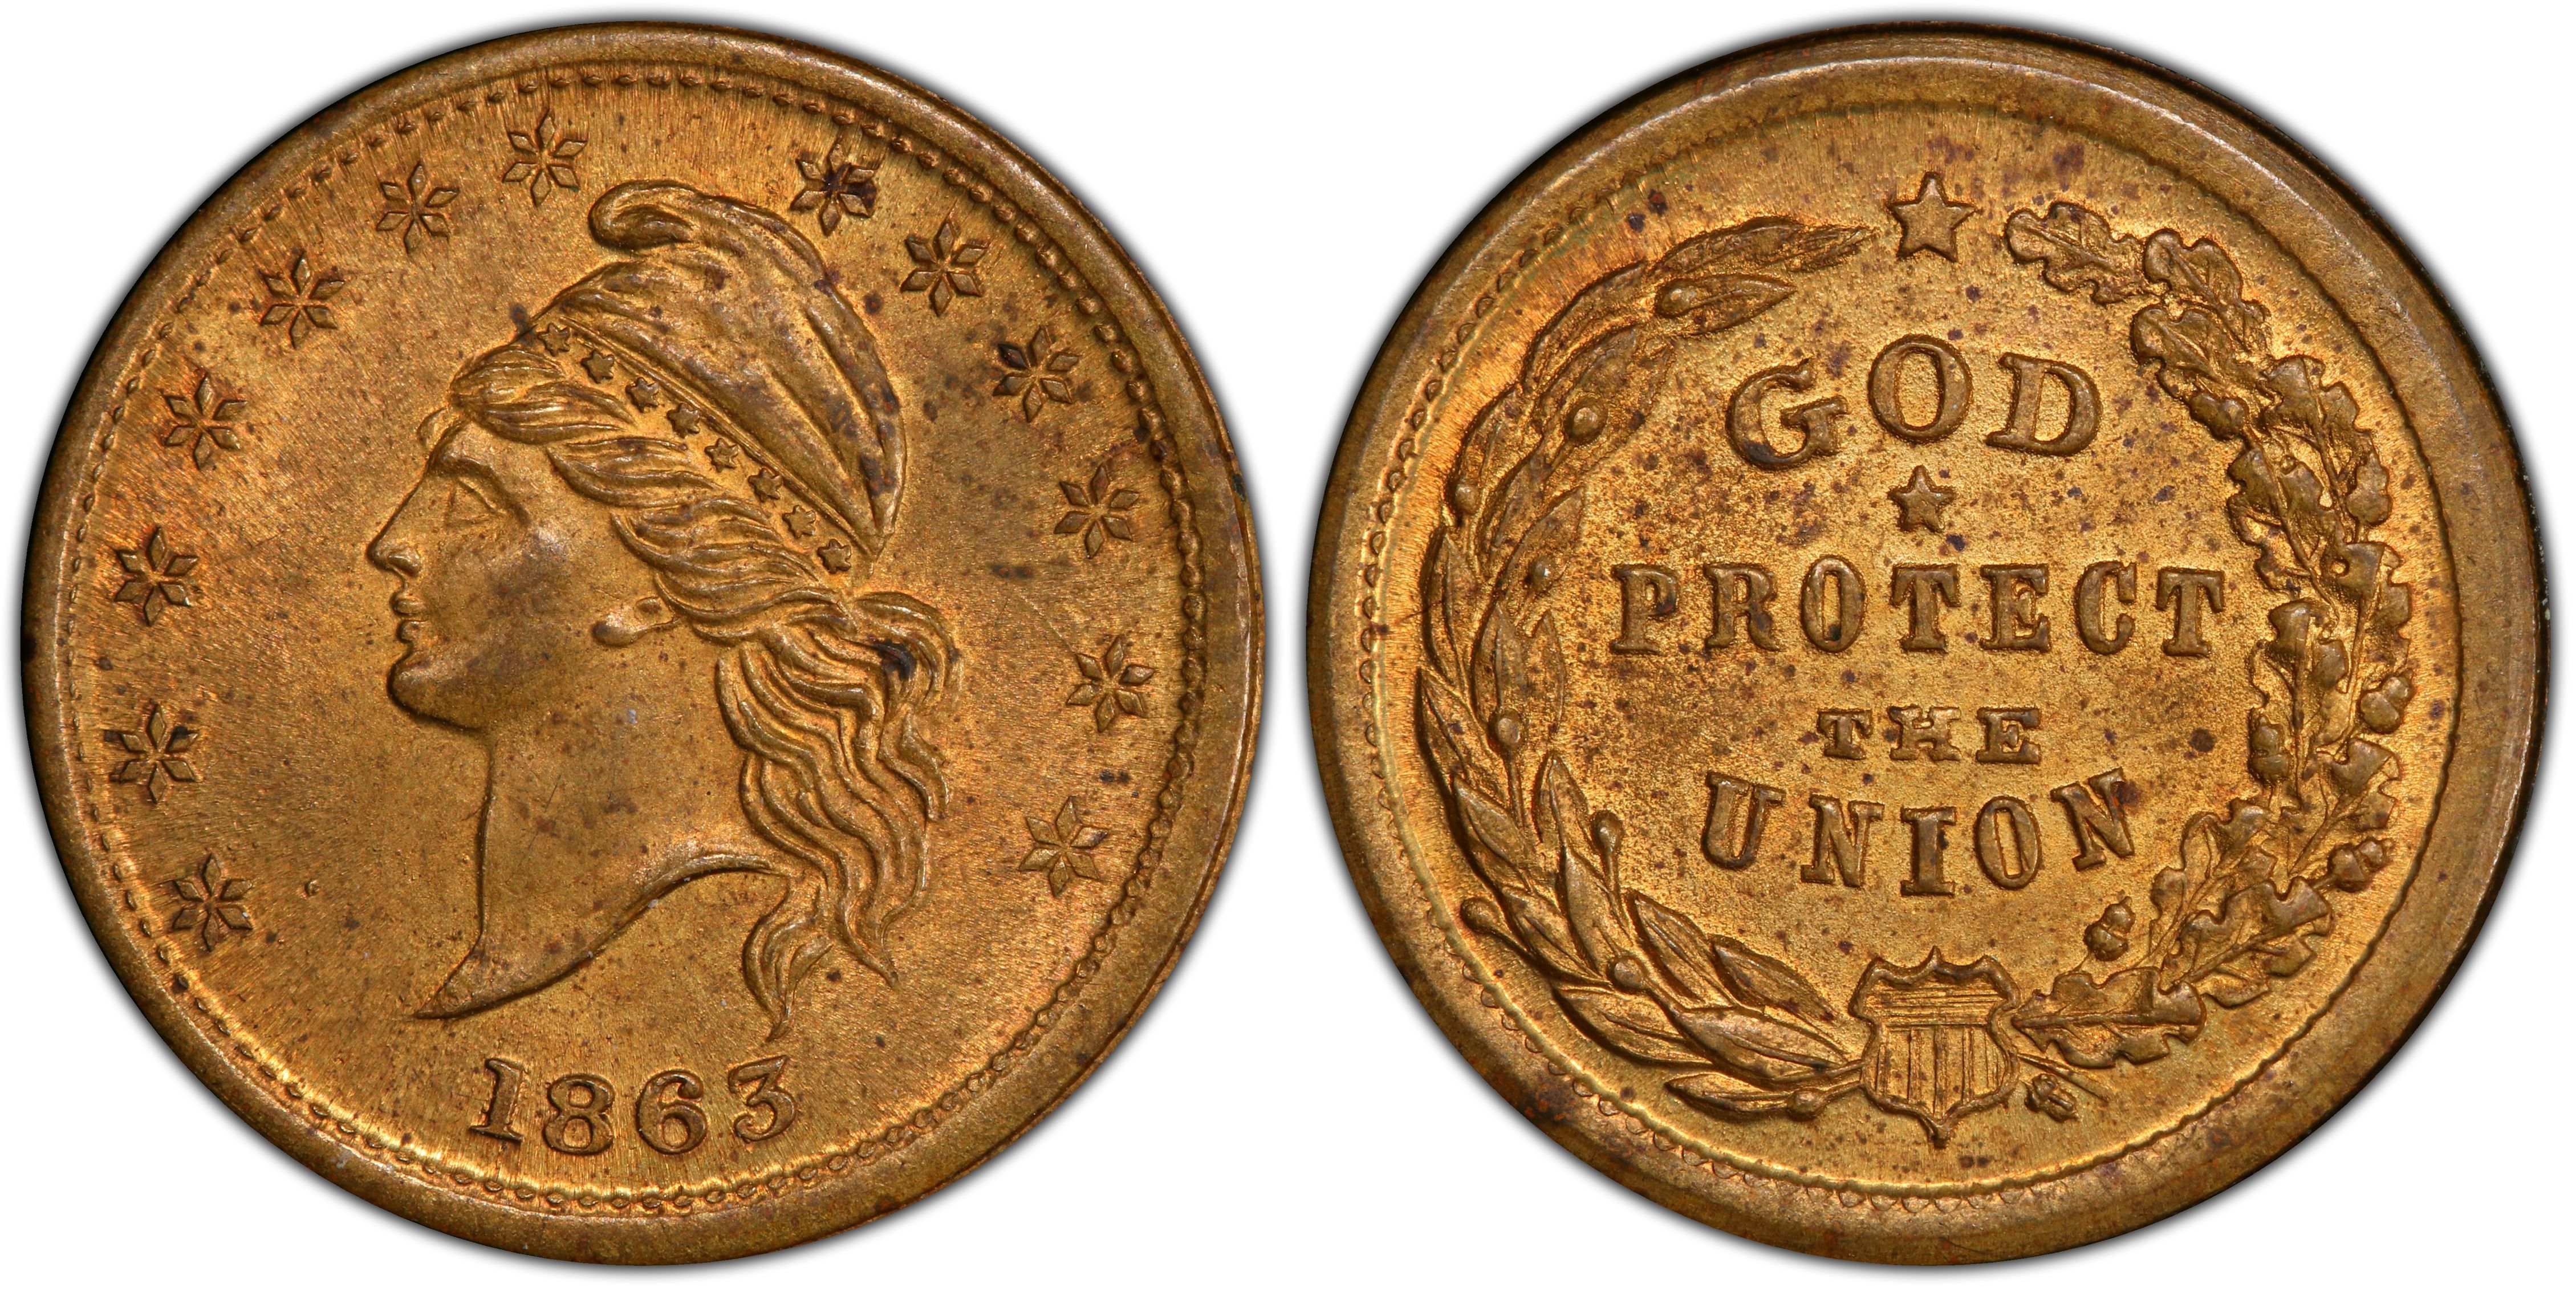 https://images.pcgs.com/CoinFacts/45149490_243413634_2200.jpg